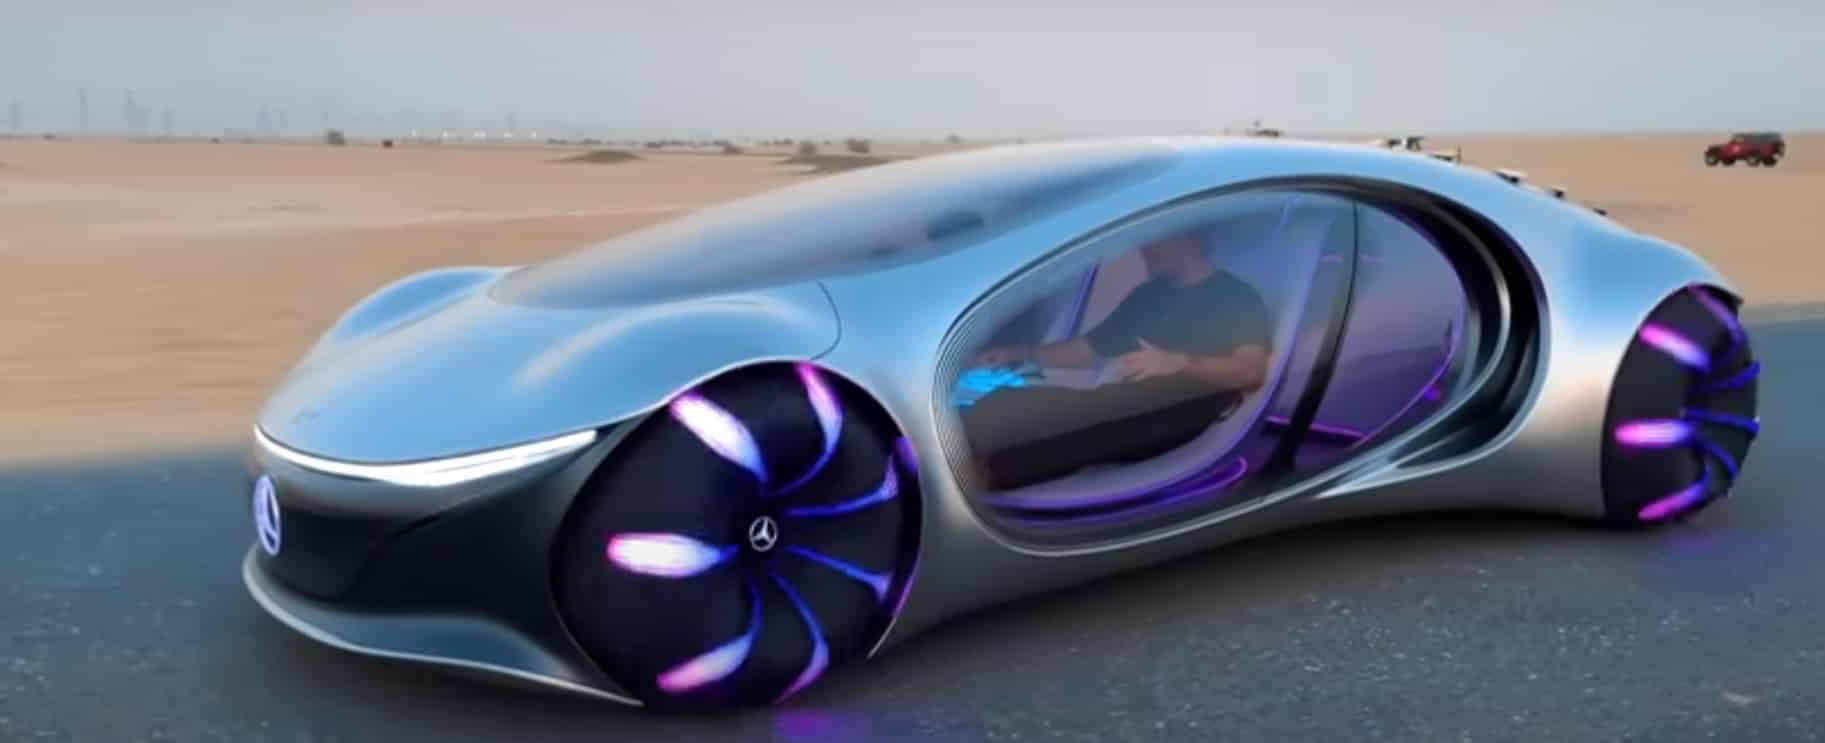 WATCH: The world’s coolest concept car – Mercedes AVTR